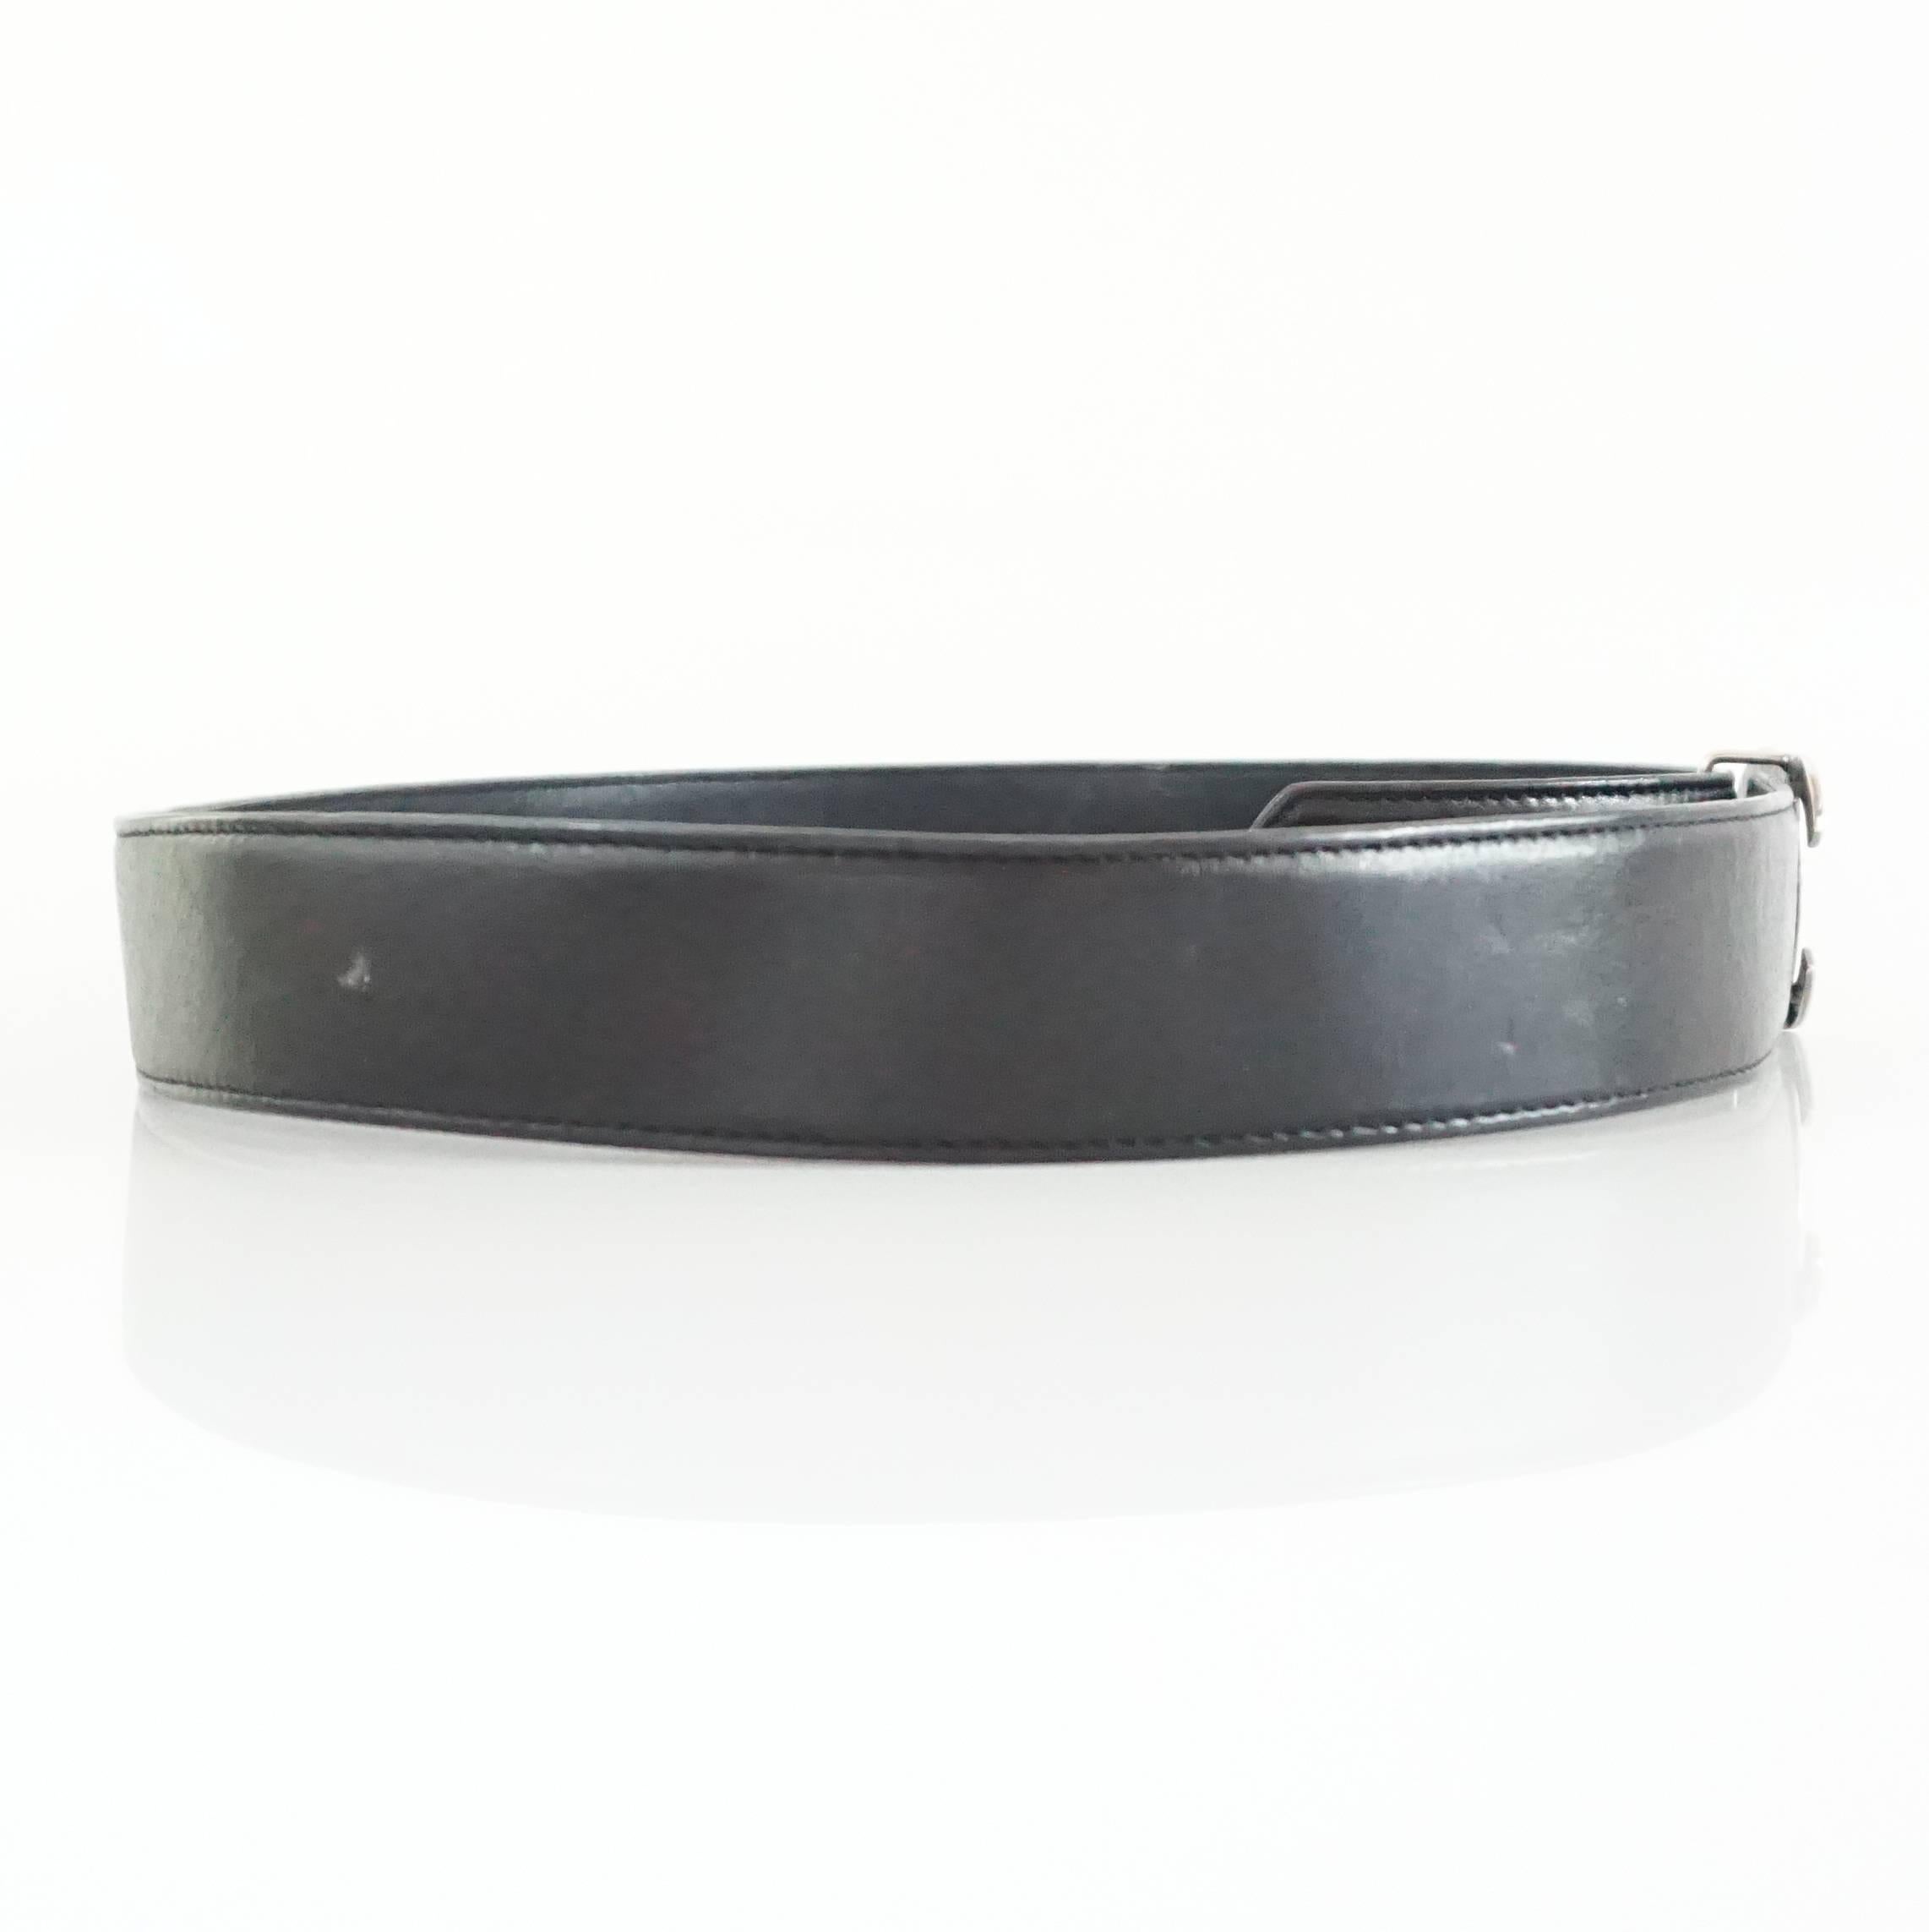 This vintage Chanel belt is made of black leather. It has a silver Chanel logo buckle. This belt is in good condition with some wear to the leather and wear and minor scratches to the buckle. This belt is from 99P, size 80/32.

Measurements
Length: